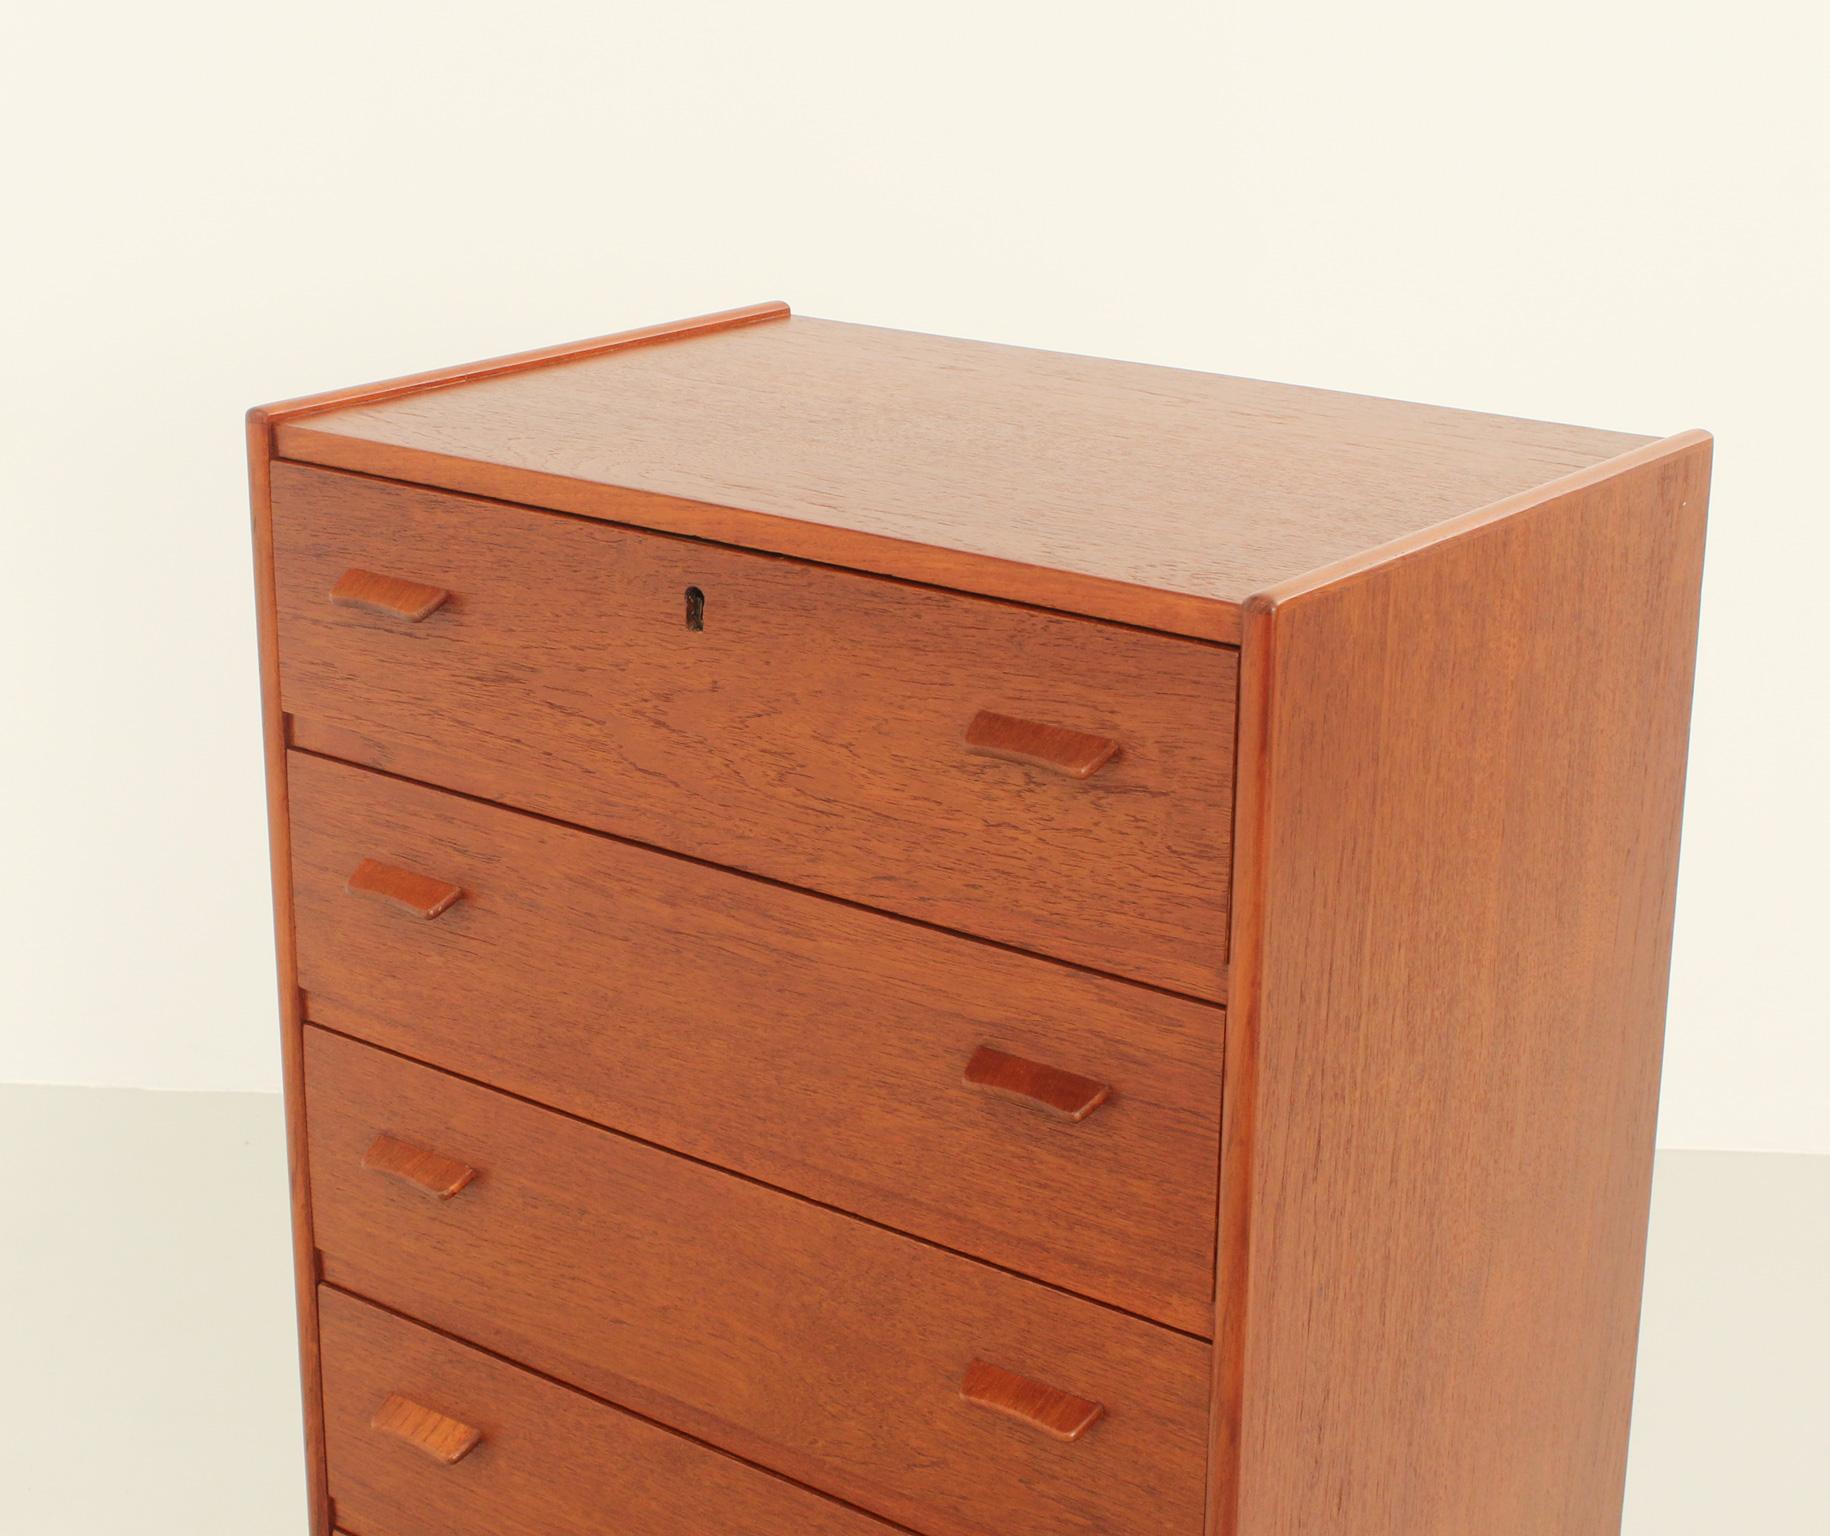 Chest of Drawers by Carl Aage Skov for Munch Møbler, 1957 For Sale 5